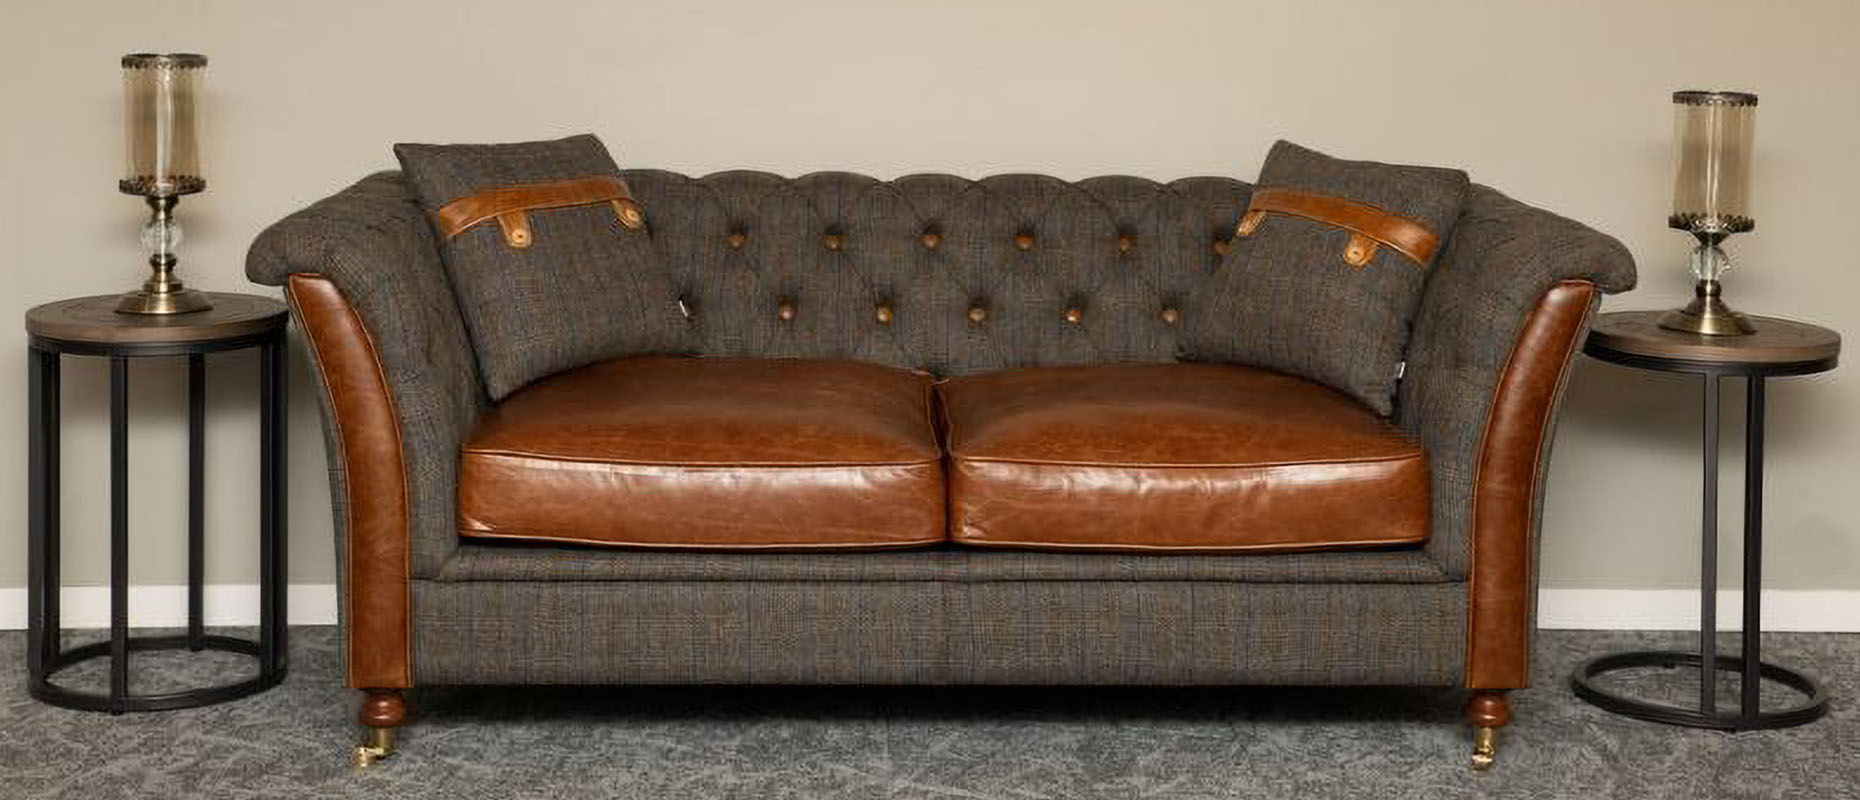 Granby sofa collection at Forrest Furnishing